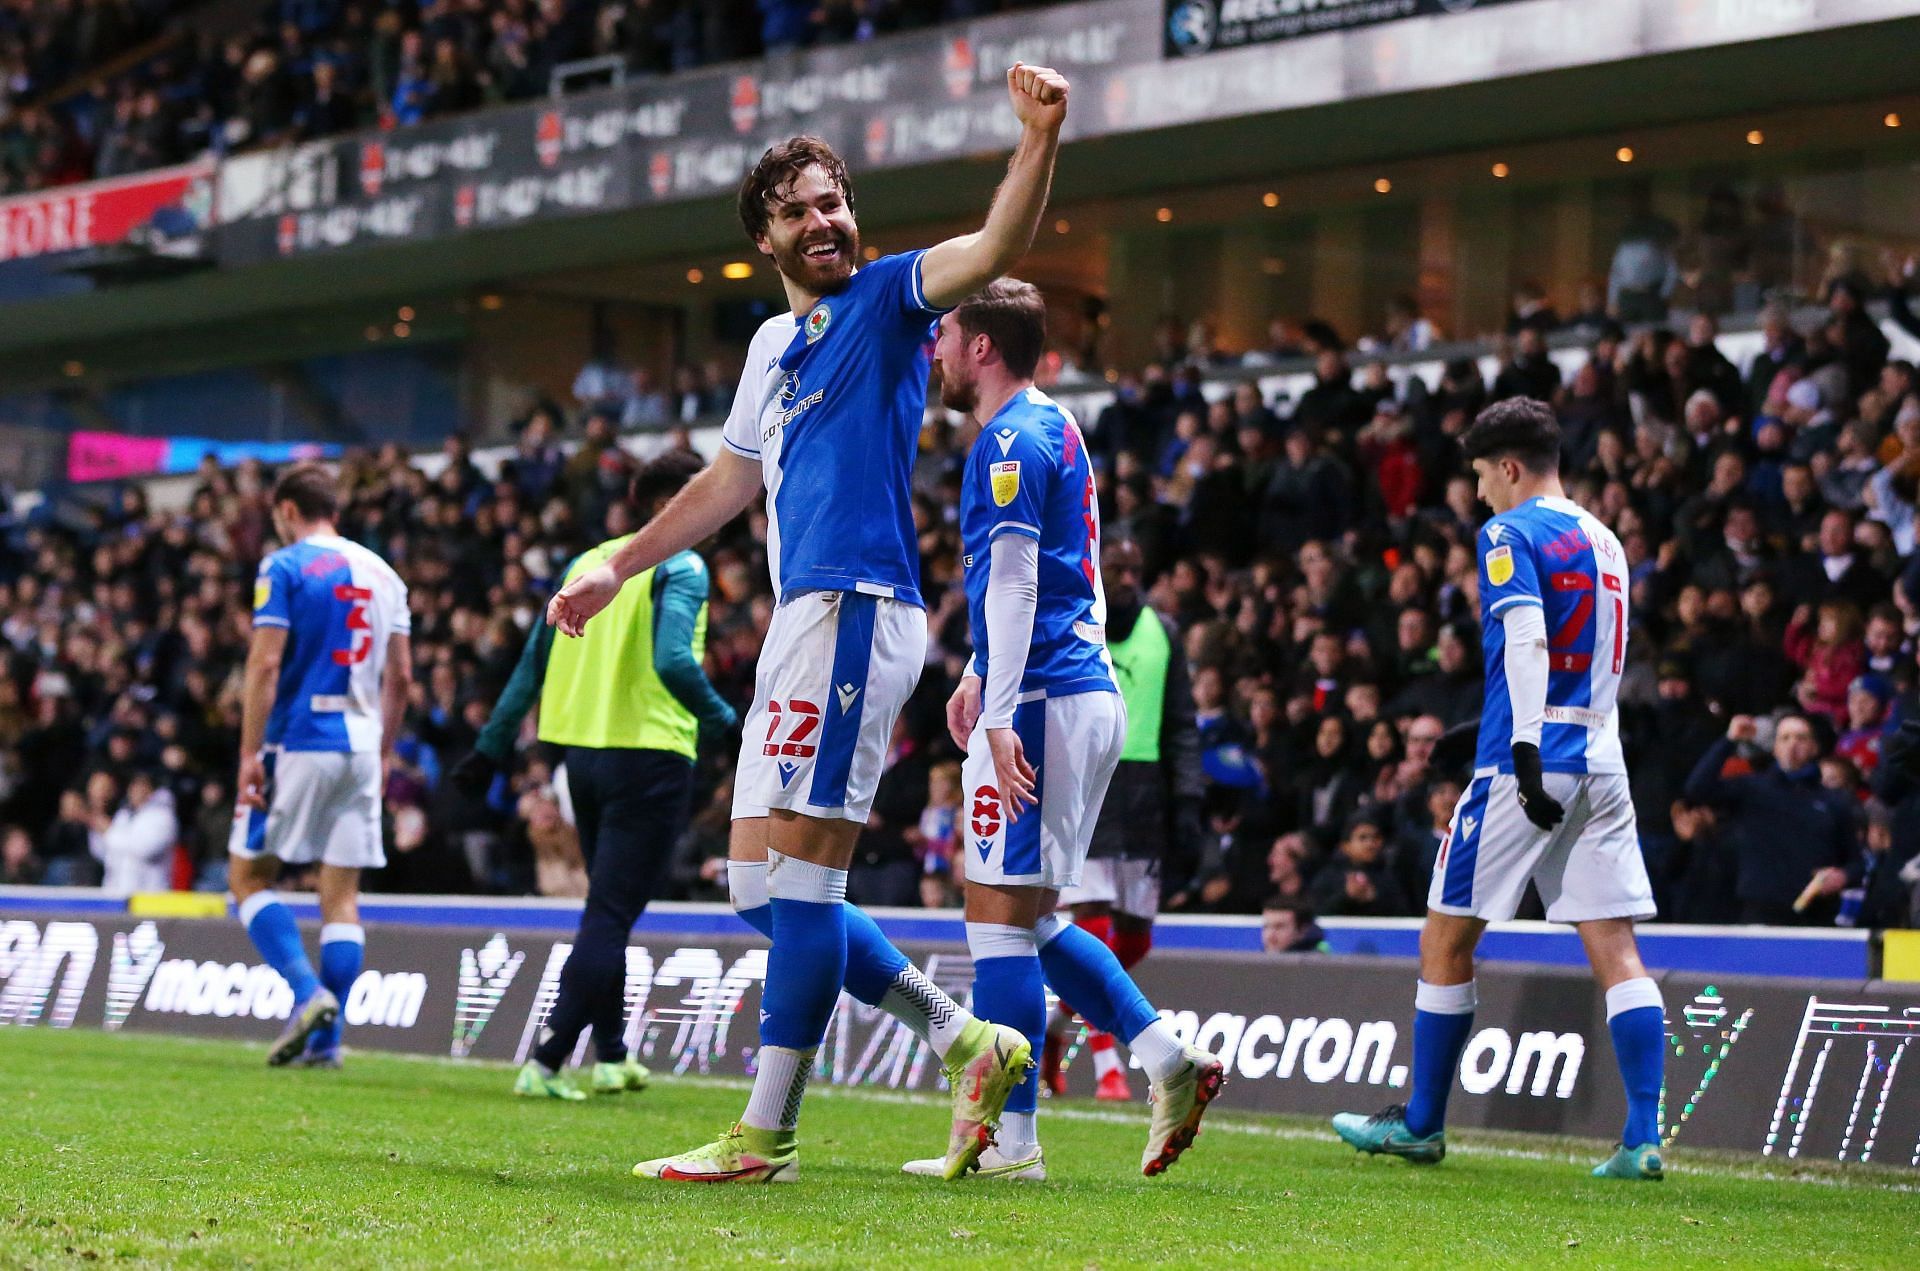 Blackburn Rovers are looking to progress to the next round